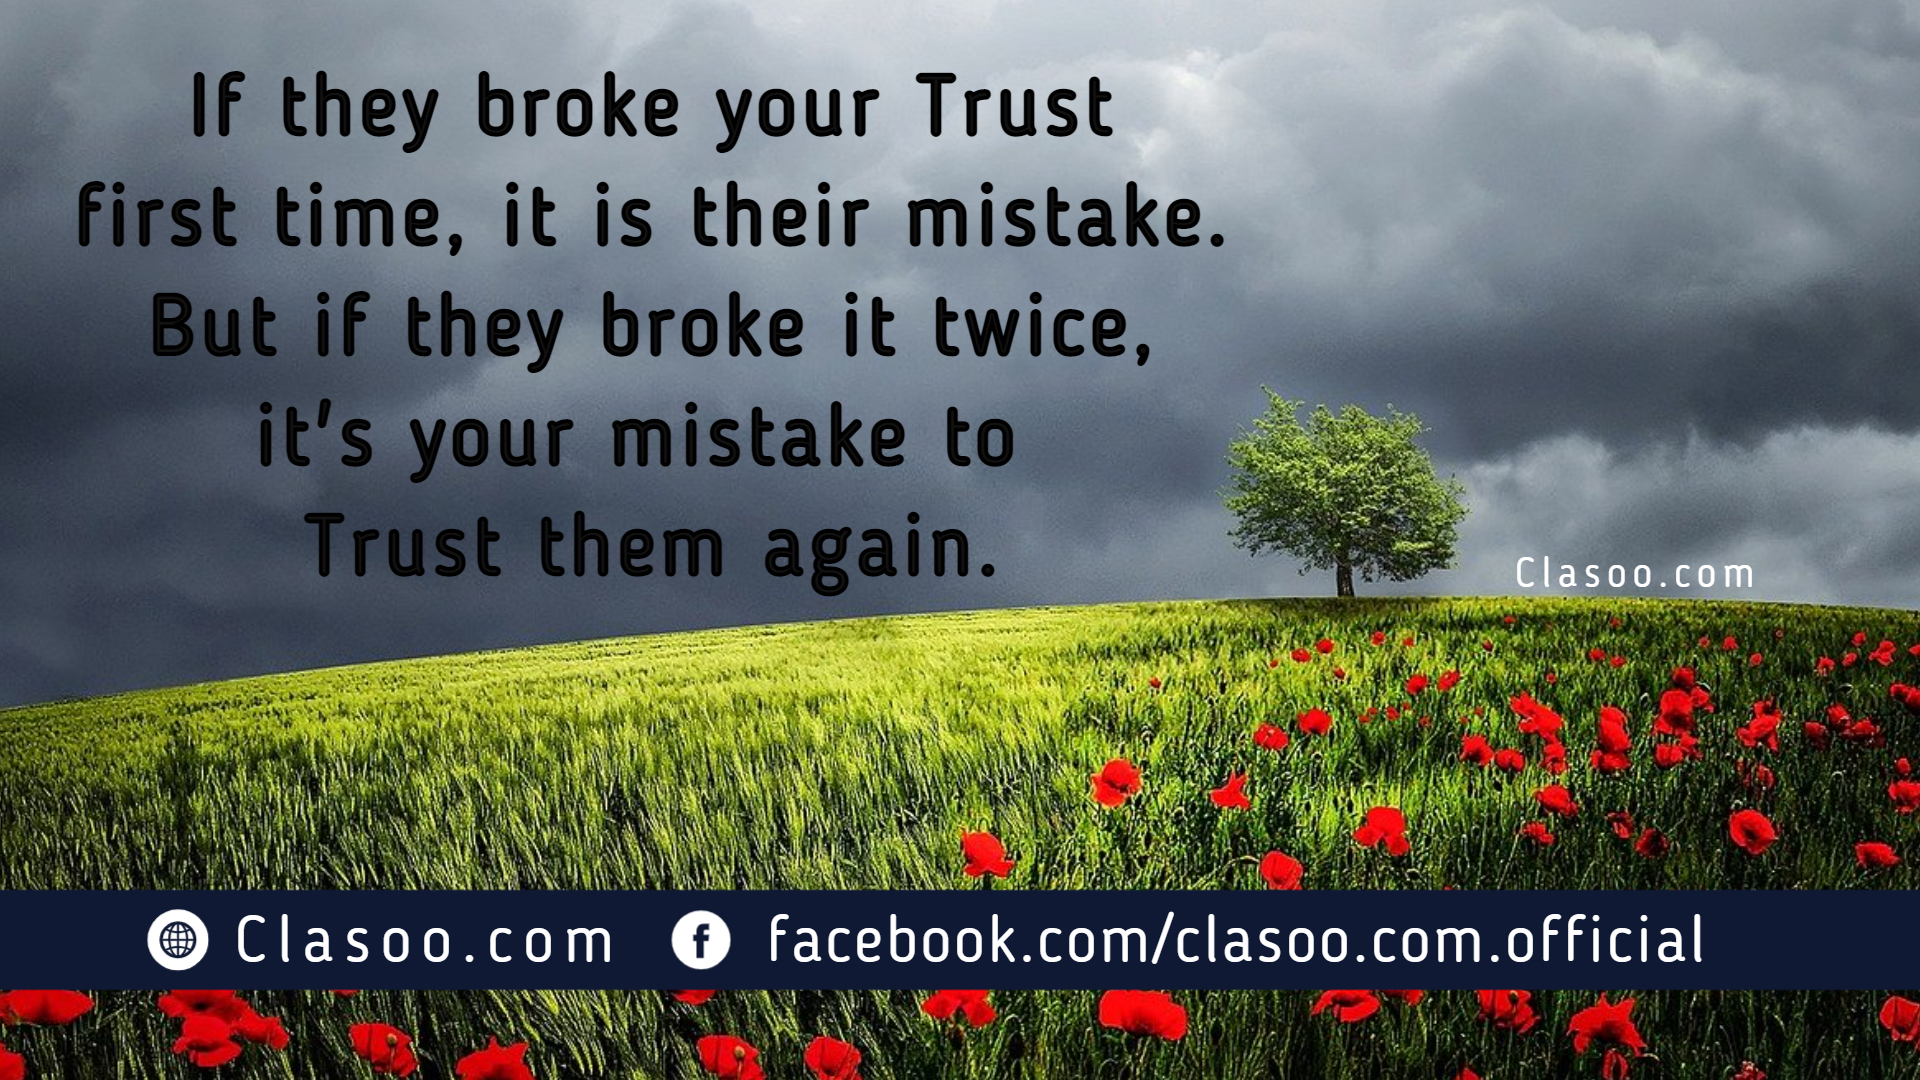 If they broke your Trust first time, it is their mistake. But if they broke it twice, it's your mistake to Trust them again.